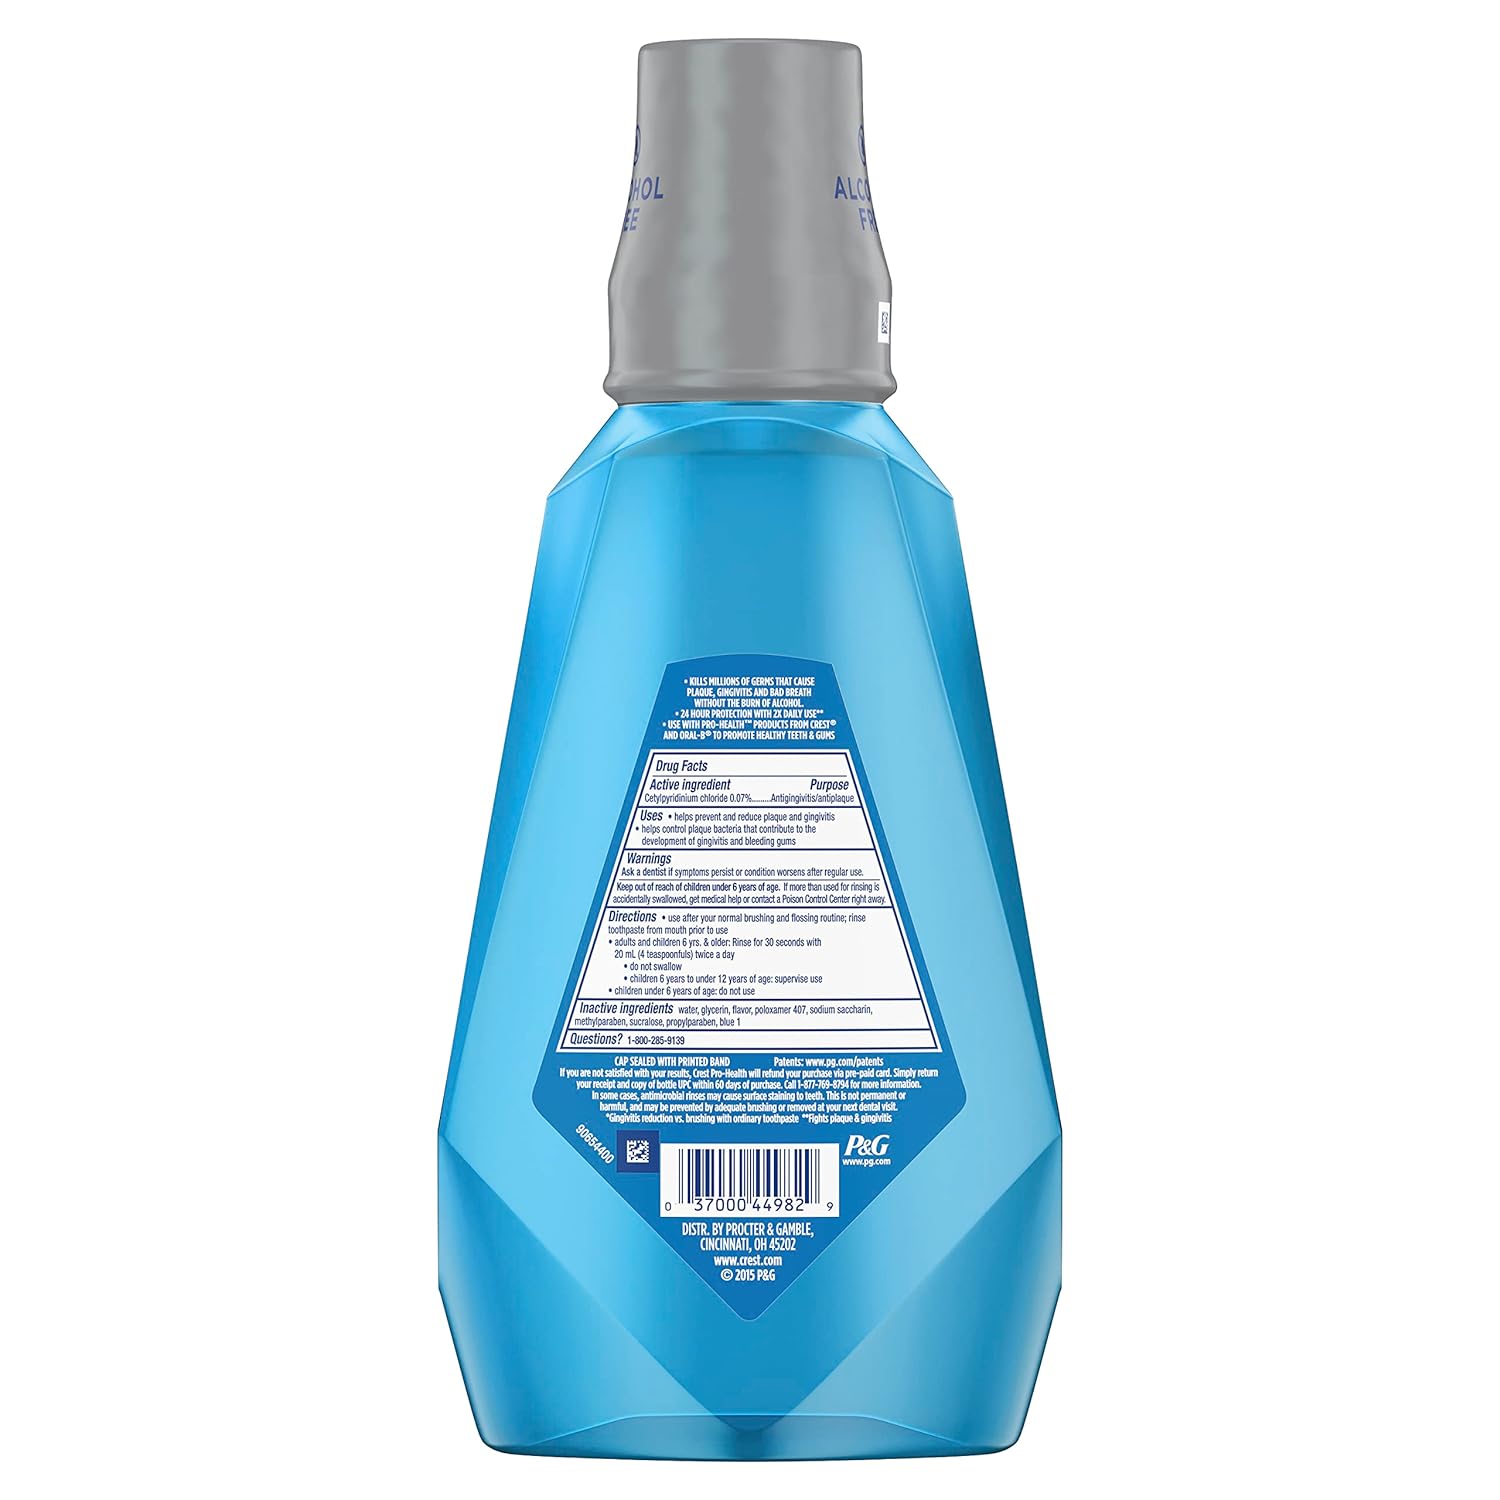 Crest Pro Health Multi-Protection Mouthwash with CPC